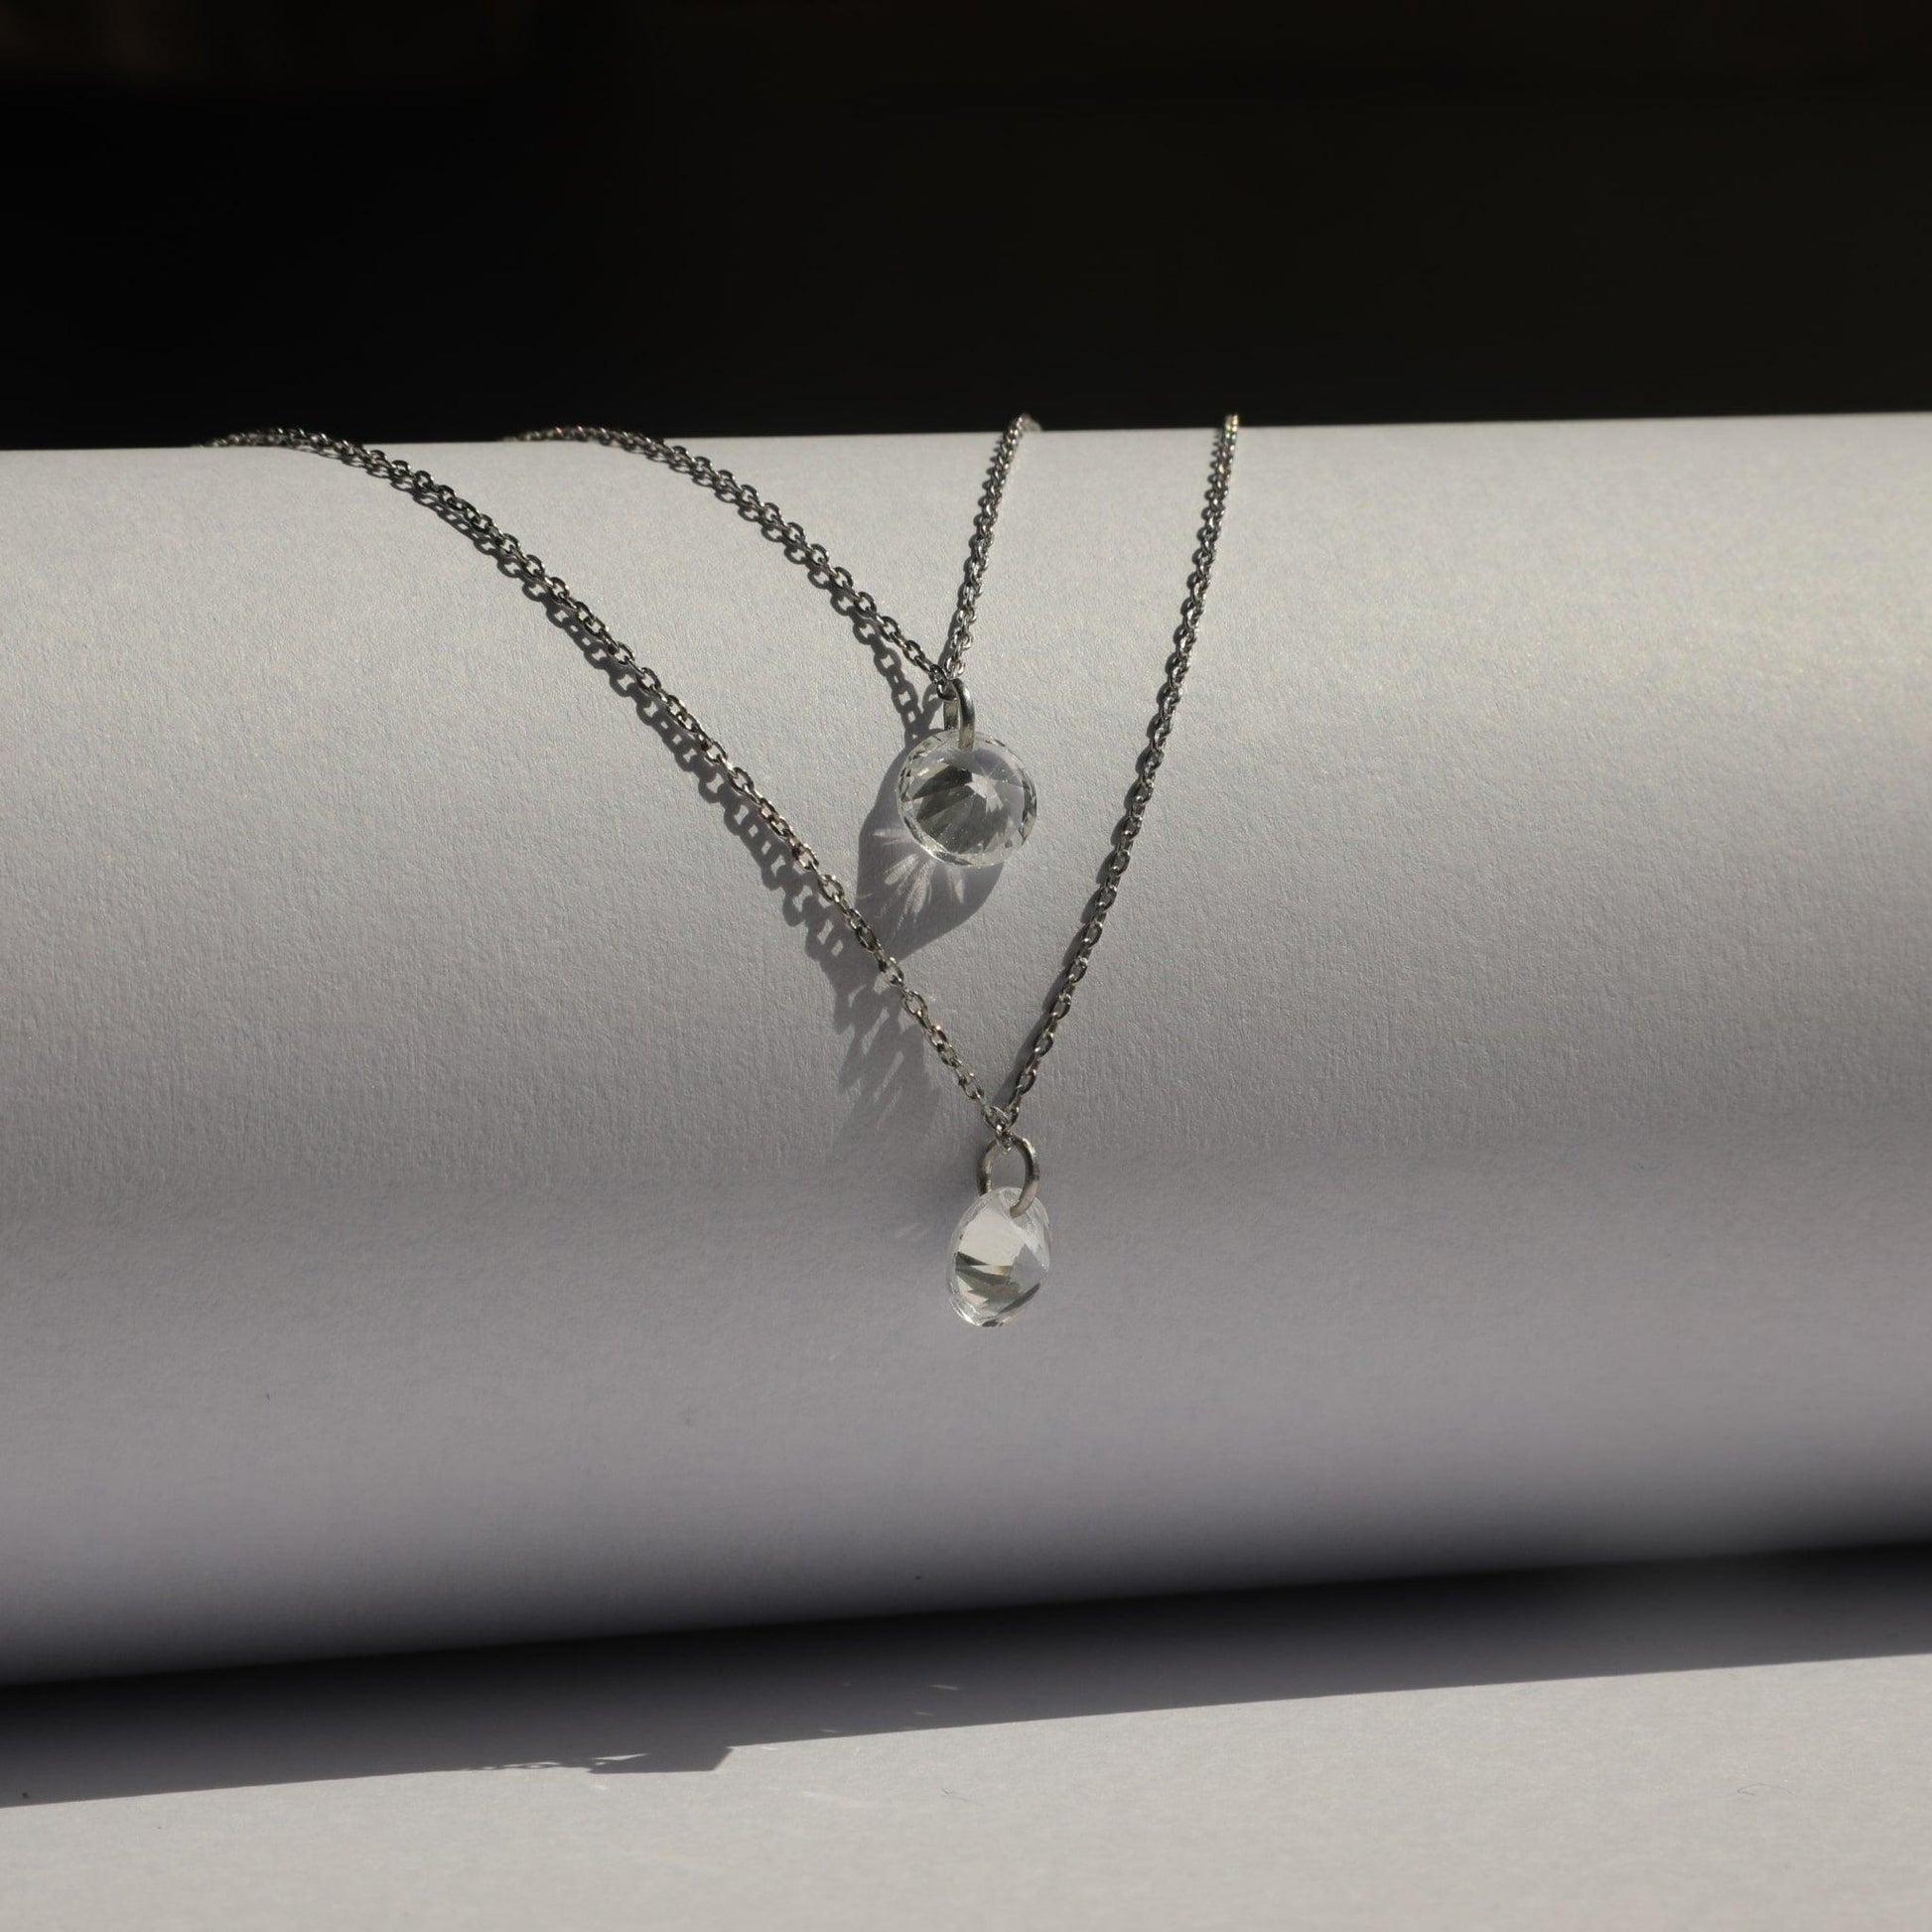 Elegant sterling silver necklace adorned with sparkling AAA cubic zirconia for a touch of timeless glamour